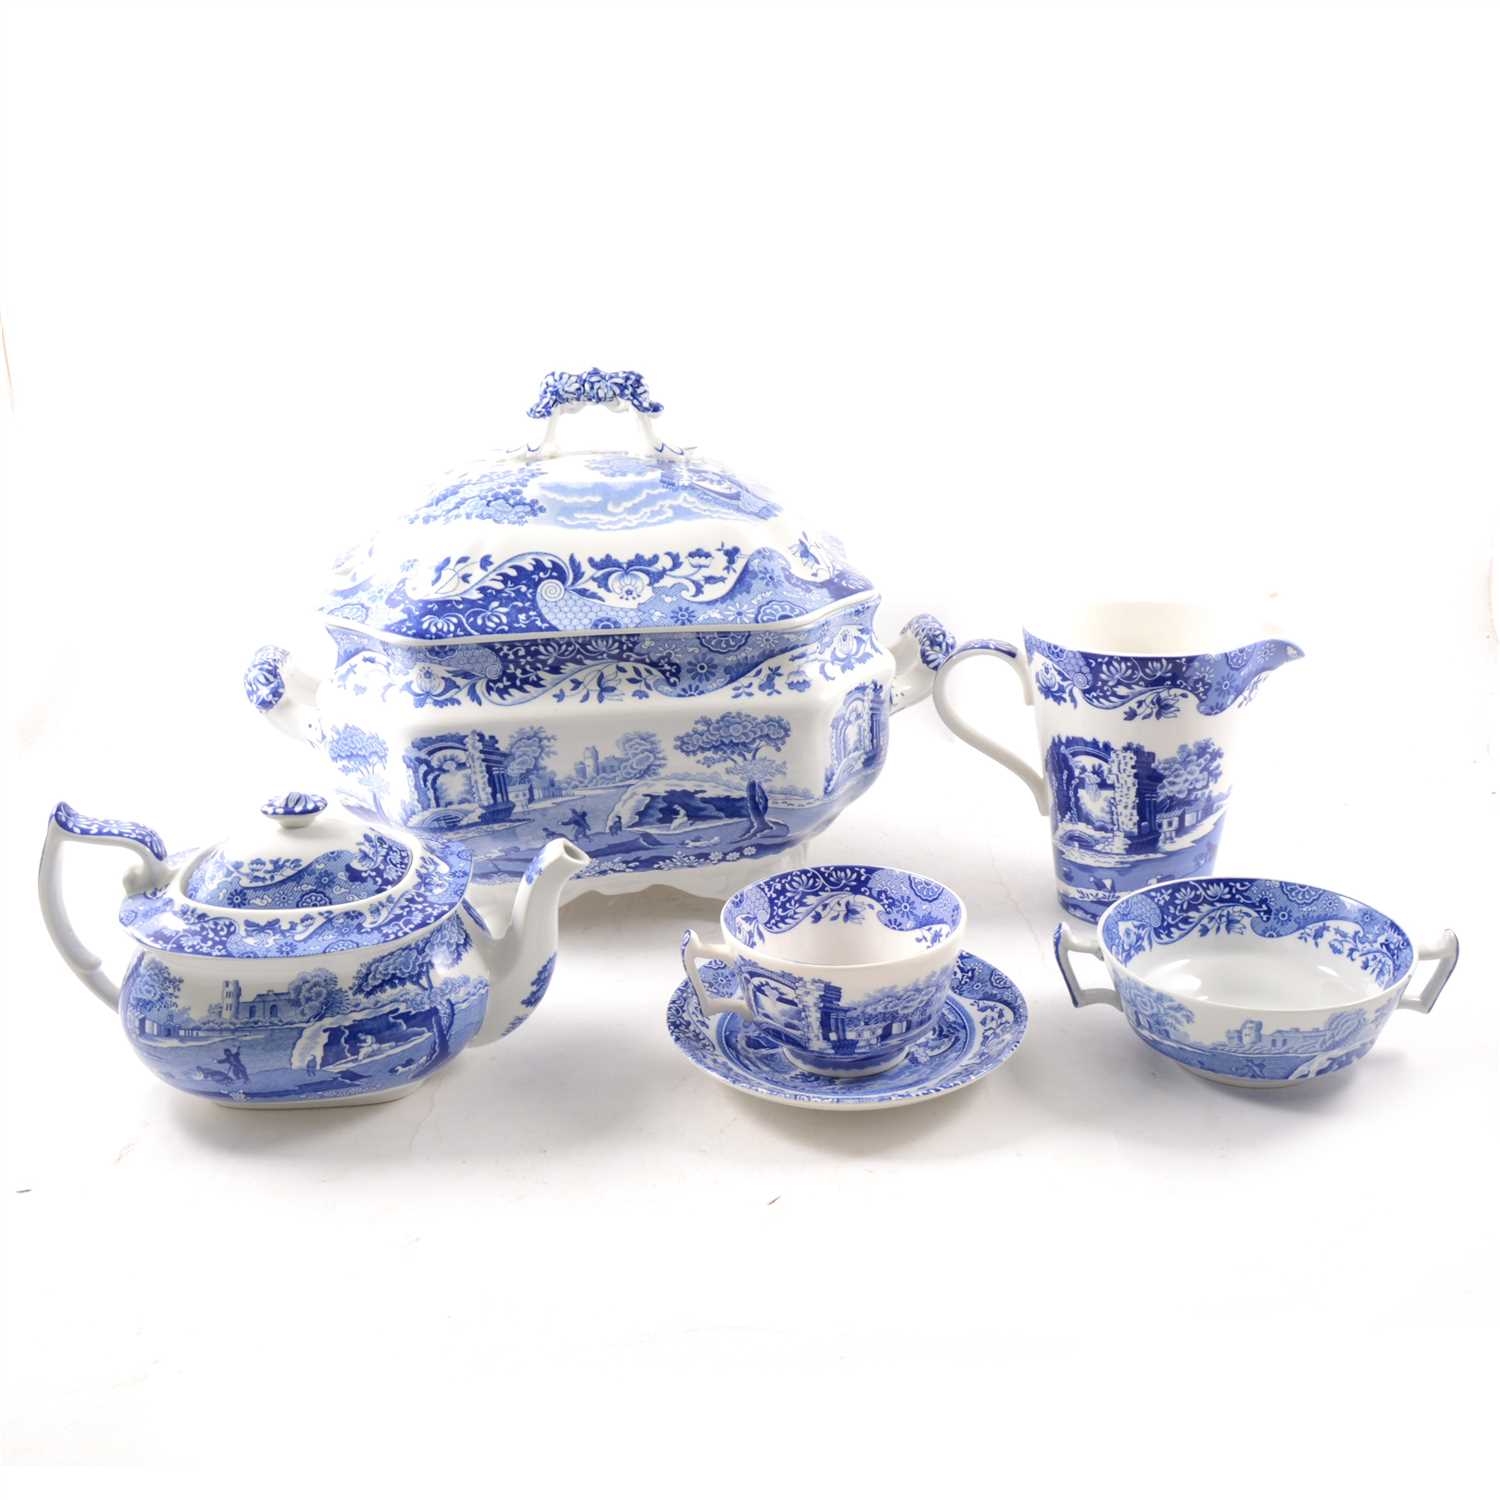 Lot 71 - Large collection of Spode blue and white Italian pattern pottery